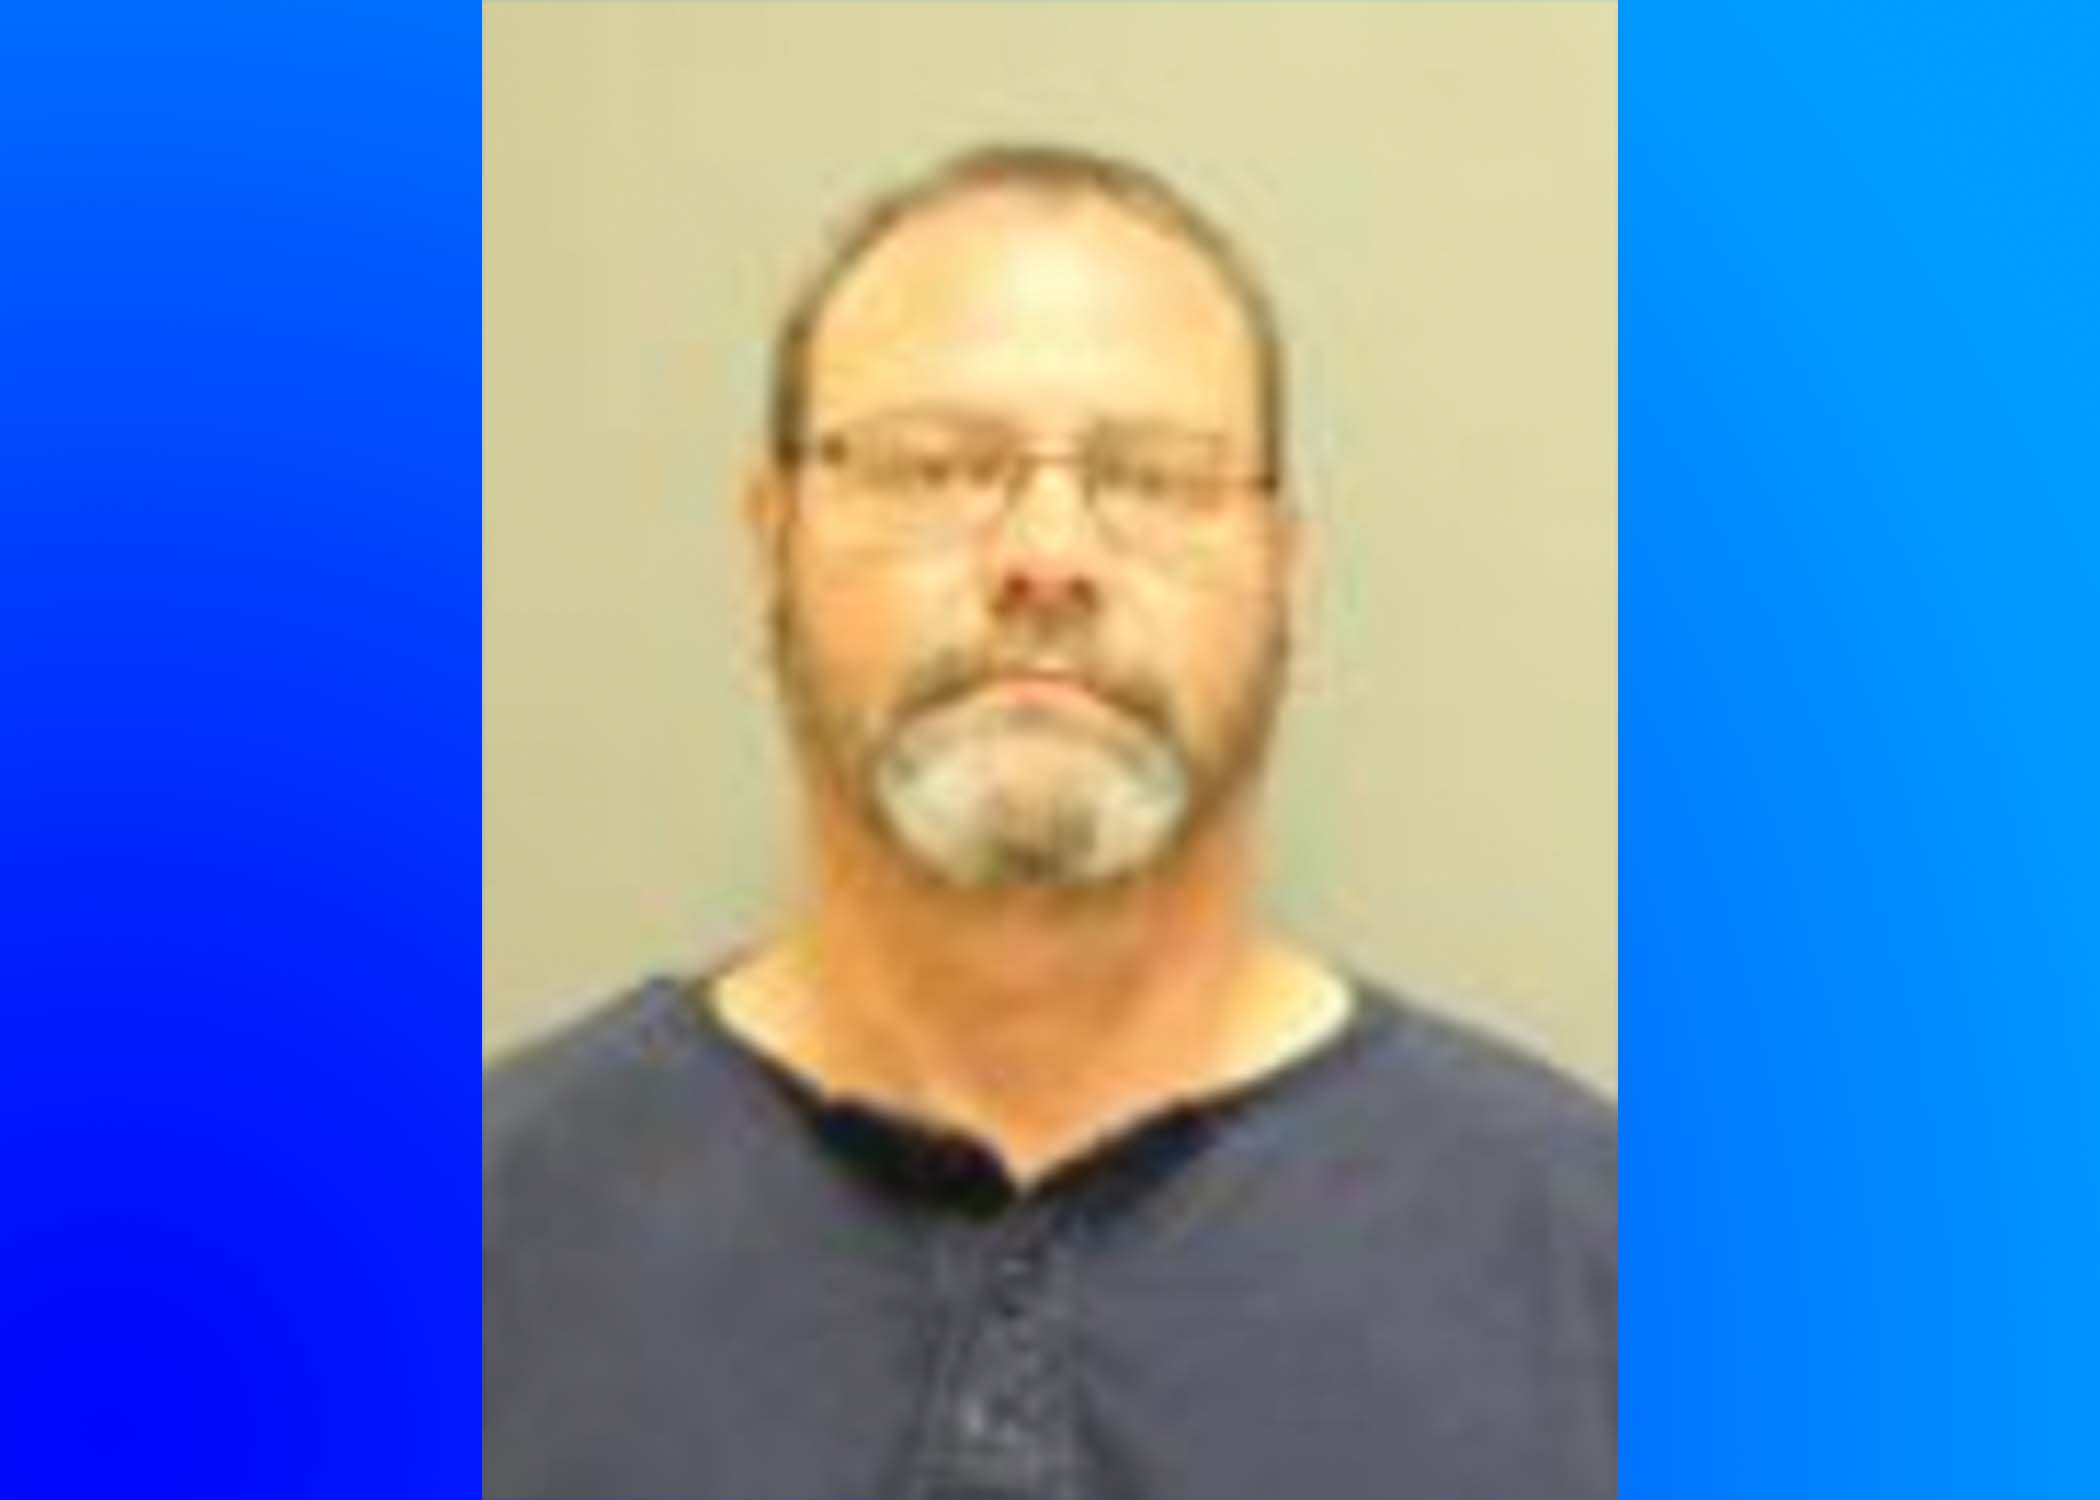 Morgan County man arrested on multiple counts of child pornography